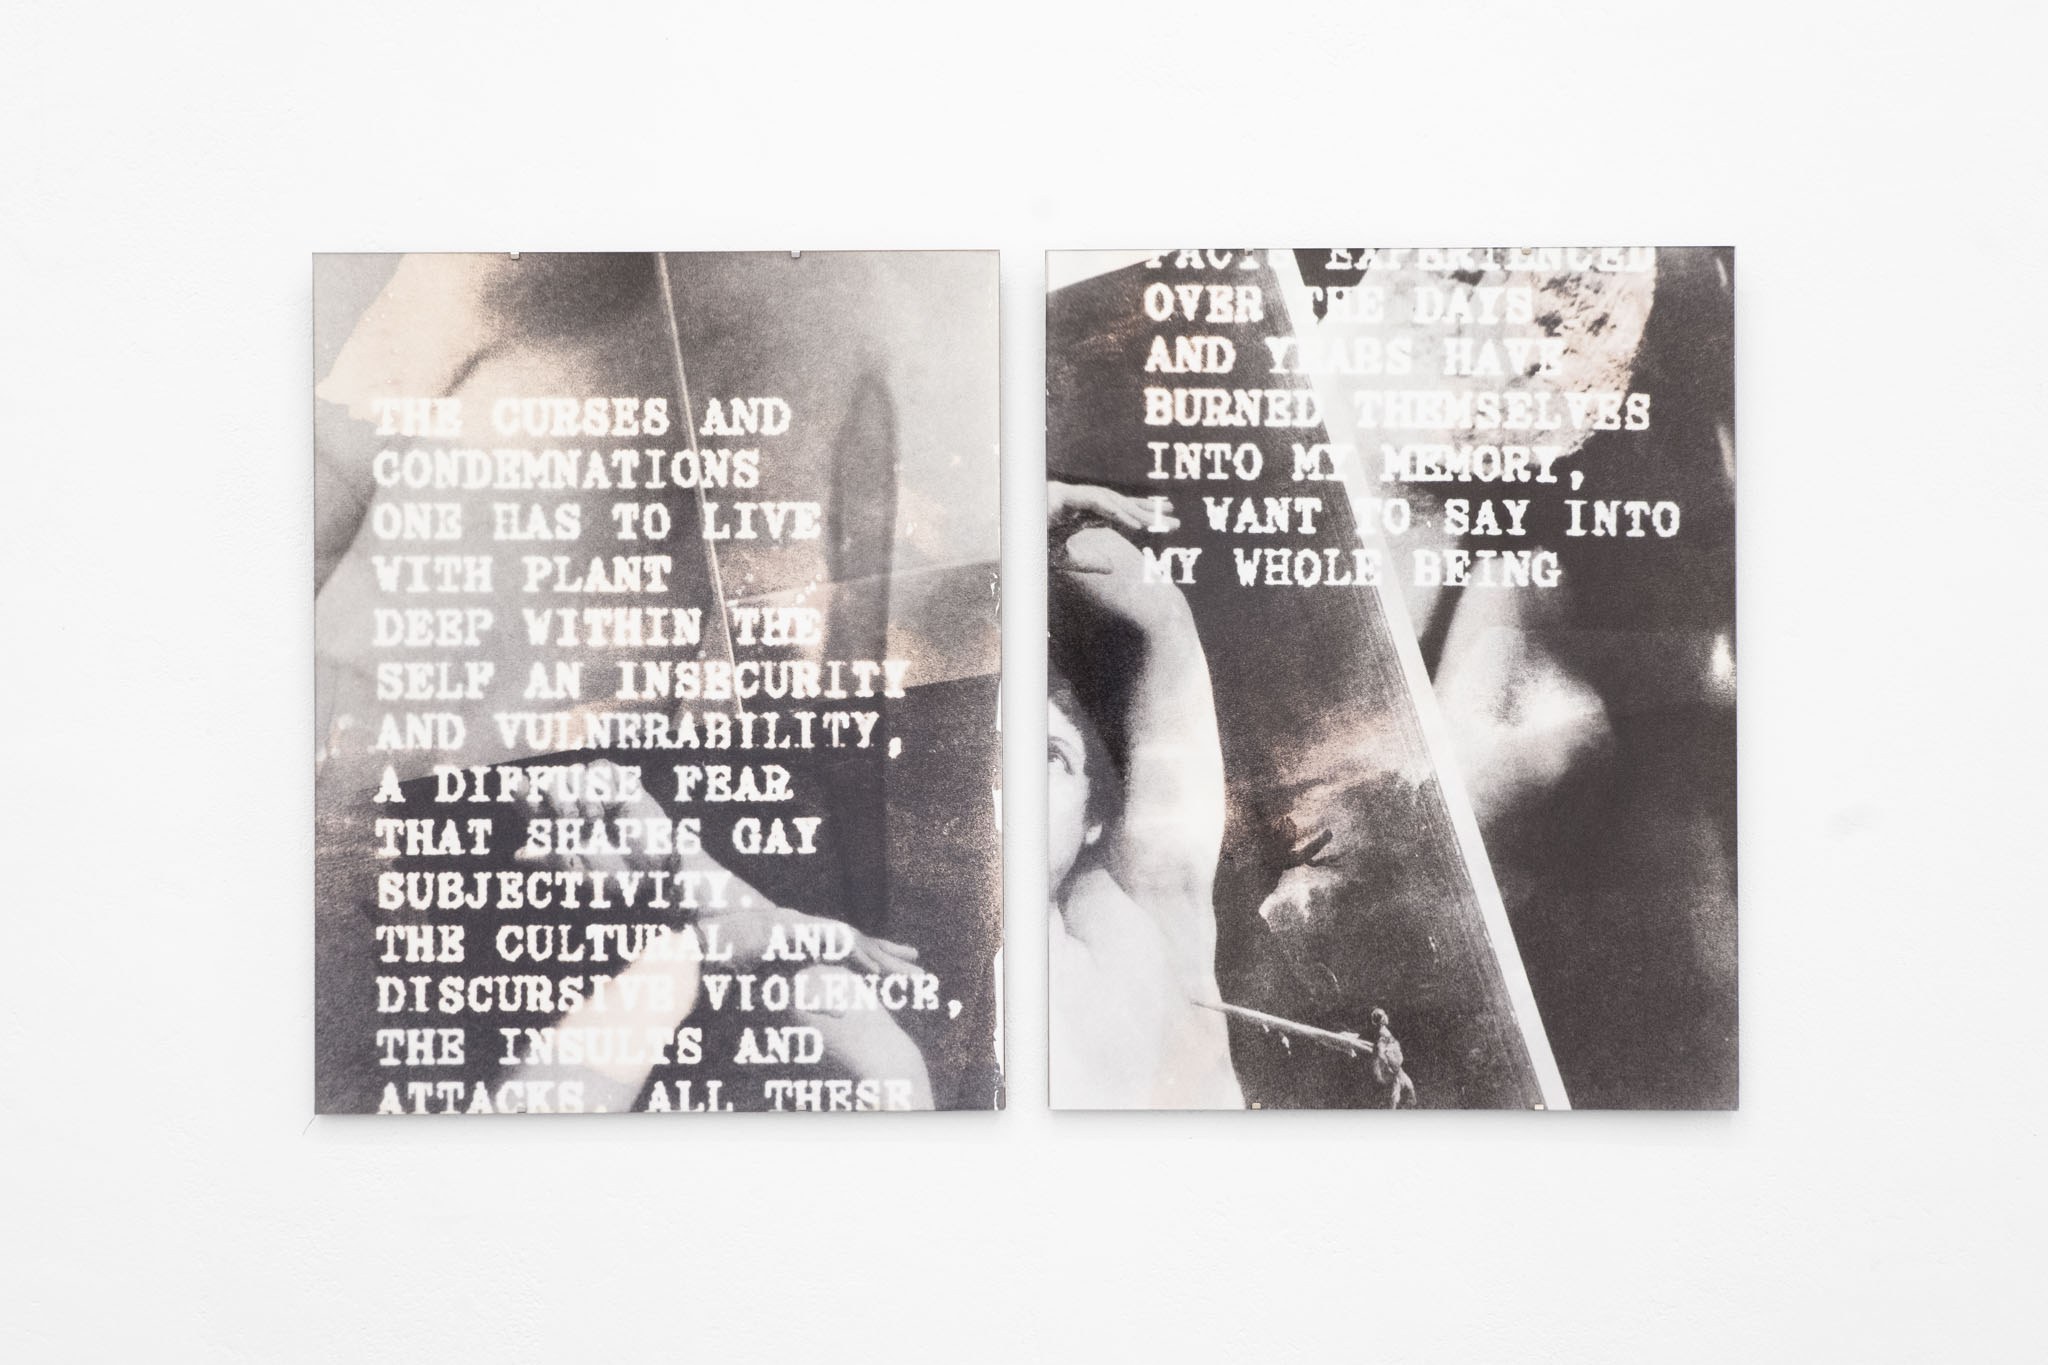 Maik Gräf: My Whole Being - 2024, bleached silver gelatine prints on baryta paper, clip frame, text fragment by Didier Eribon40×50 cm, unique pieces